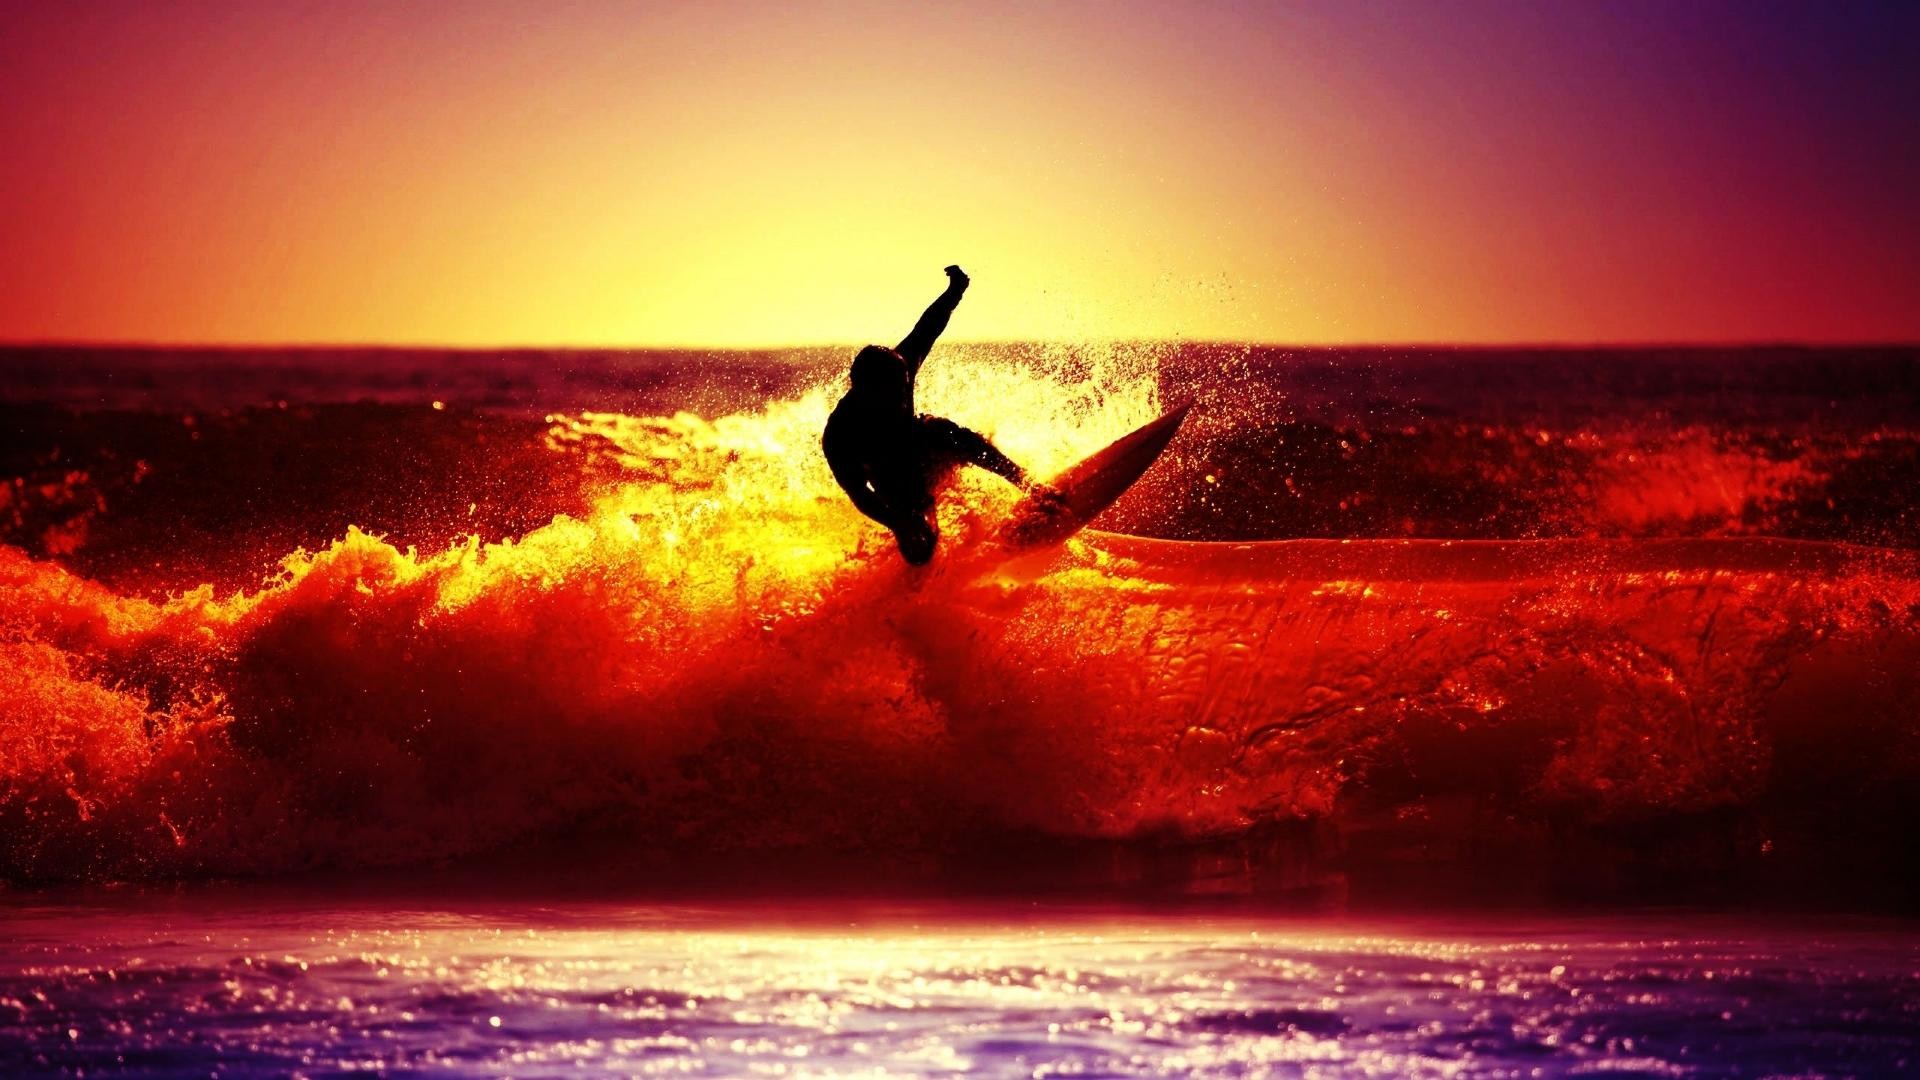 1920x1080 Related HD wallpapers of "Going Surfing At Sunset In Santa Cruz Beach"